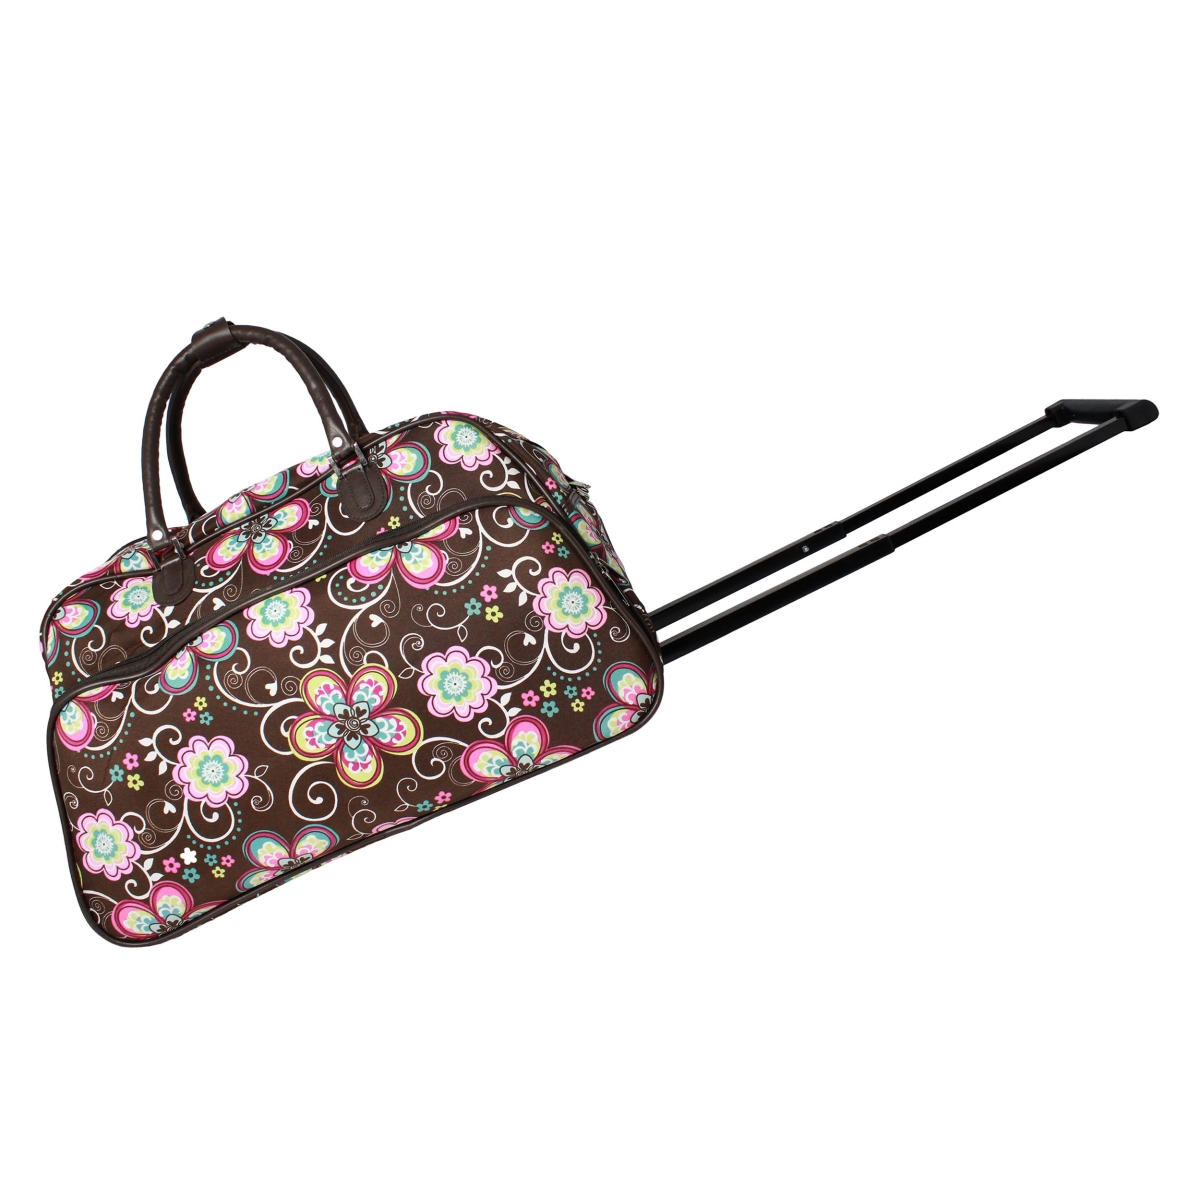 8112022-161 21 In. Carry On Rolling Duffel Bag - Brown Daisy